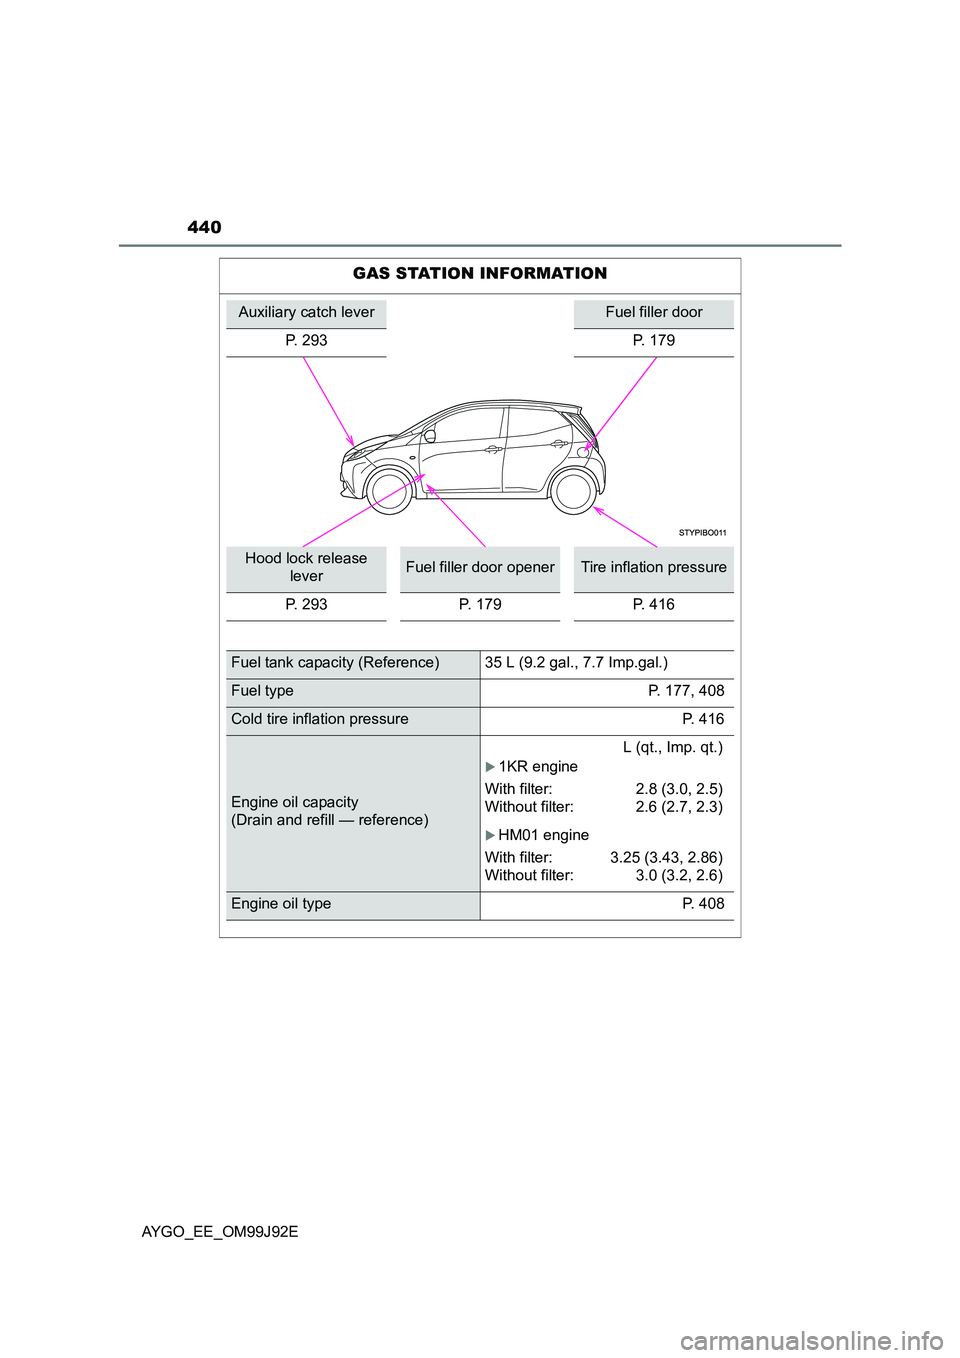 TOYOTA AYGO 2015  Owners Manual (in English) 440
AYGO_EE_OM99J92E
GAS STATION INFORMATION
Auxiliary catch leverFuel filler door 
P. 293P. 179
Hood lock release  
leverFuel filler door openerTire inflation pressure 
P. 293 P. 179 P. 416
Fuel tank